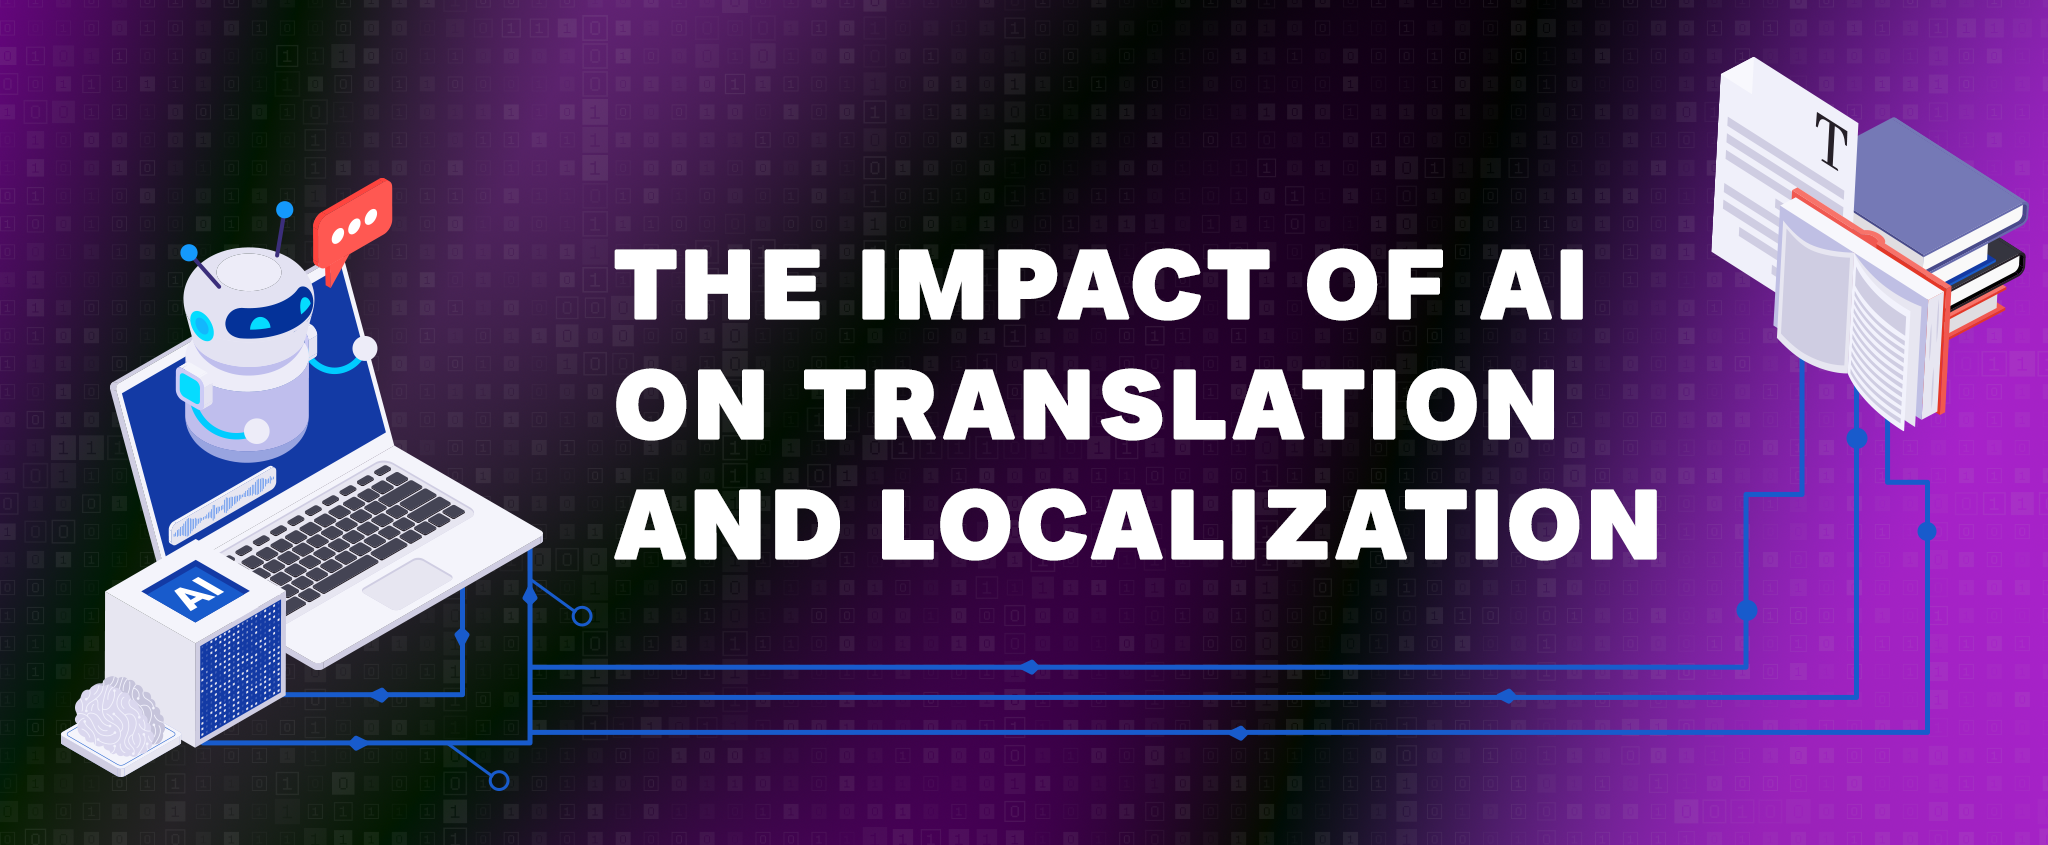 The Impact of AI on Translation and Localization